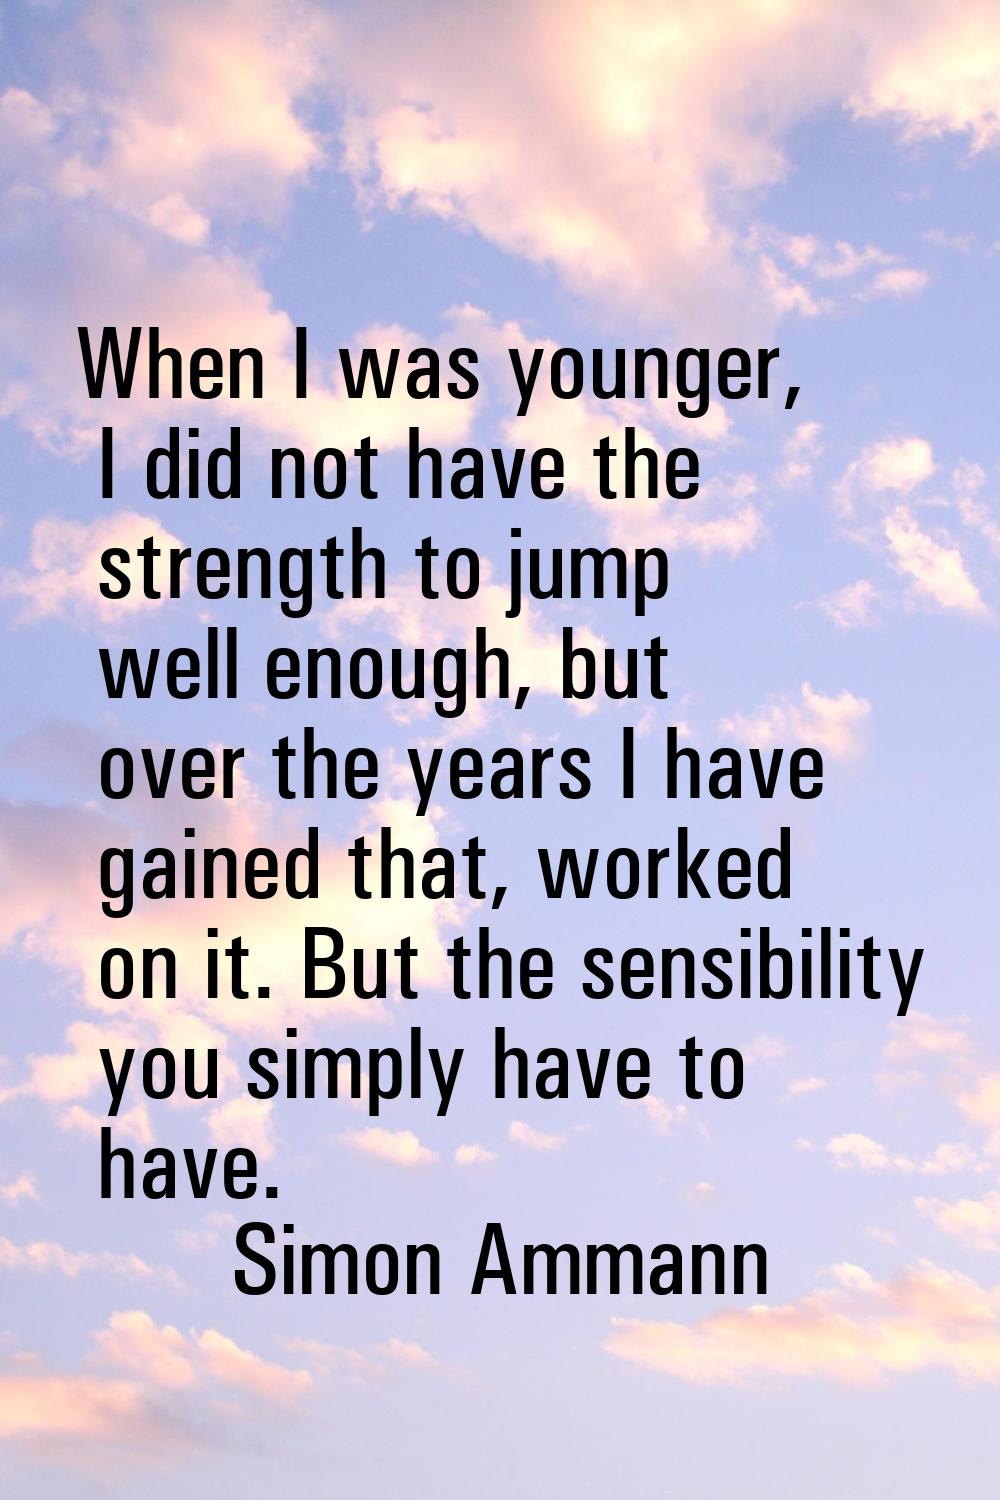 When I was younger, I did not have the strength to jump well enough, but over the years I have gain